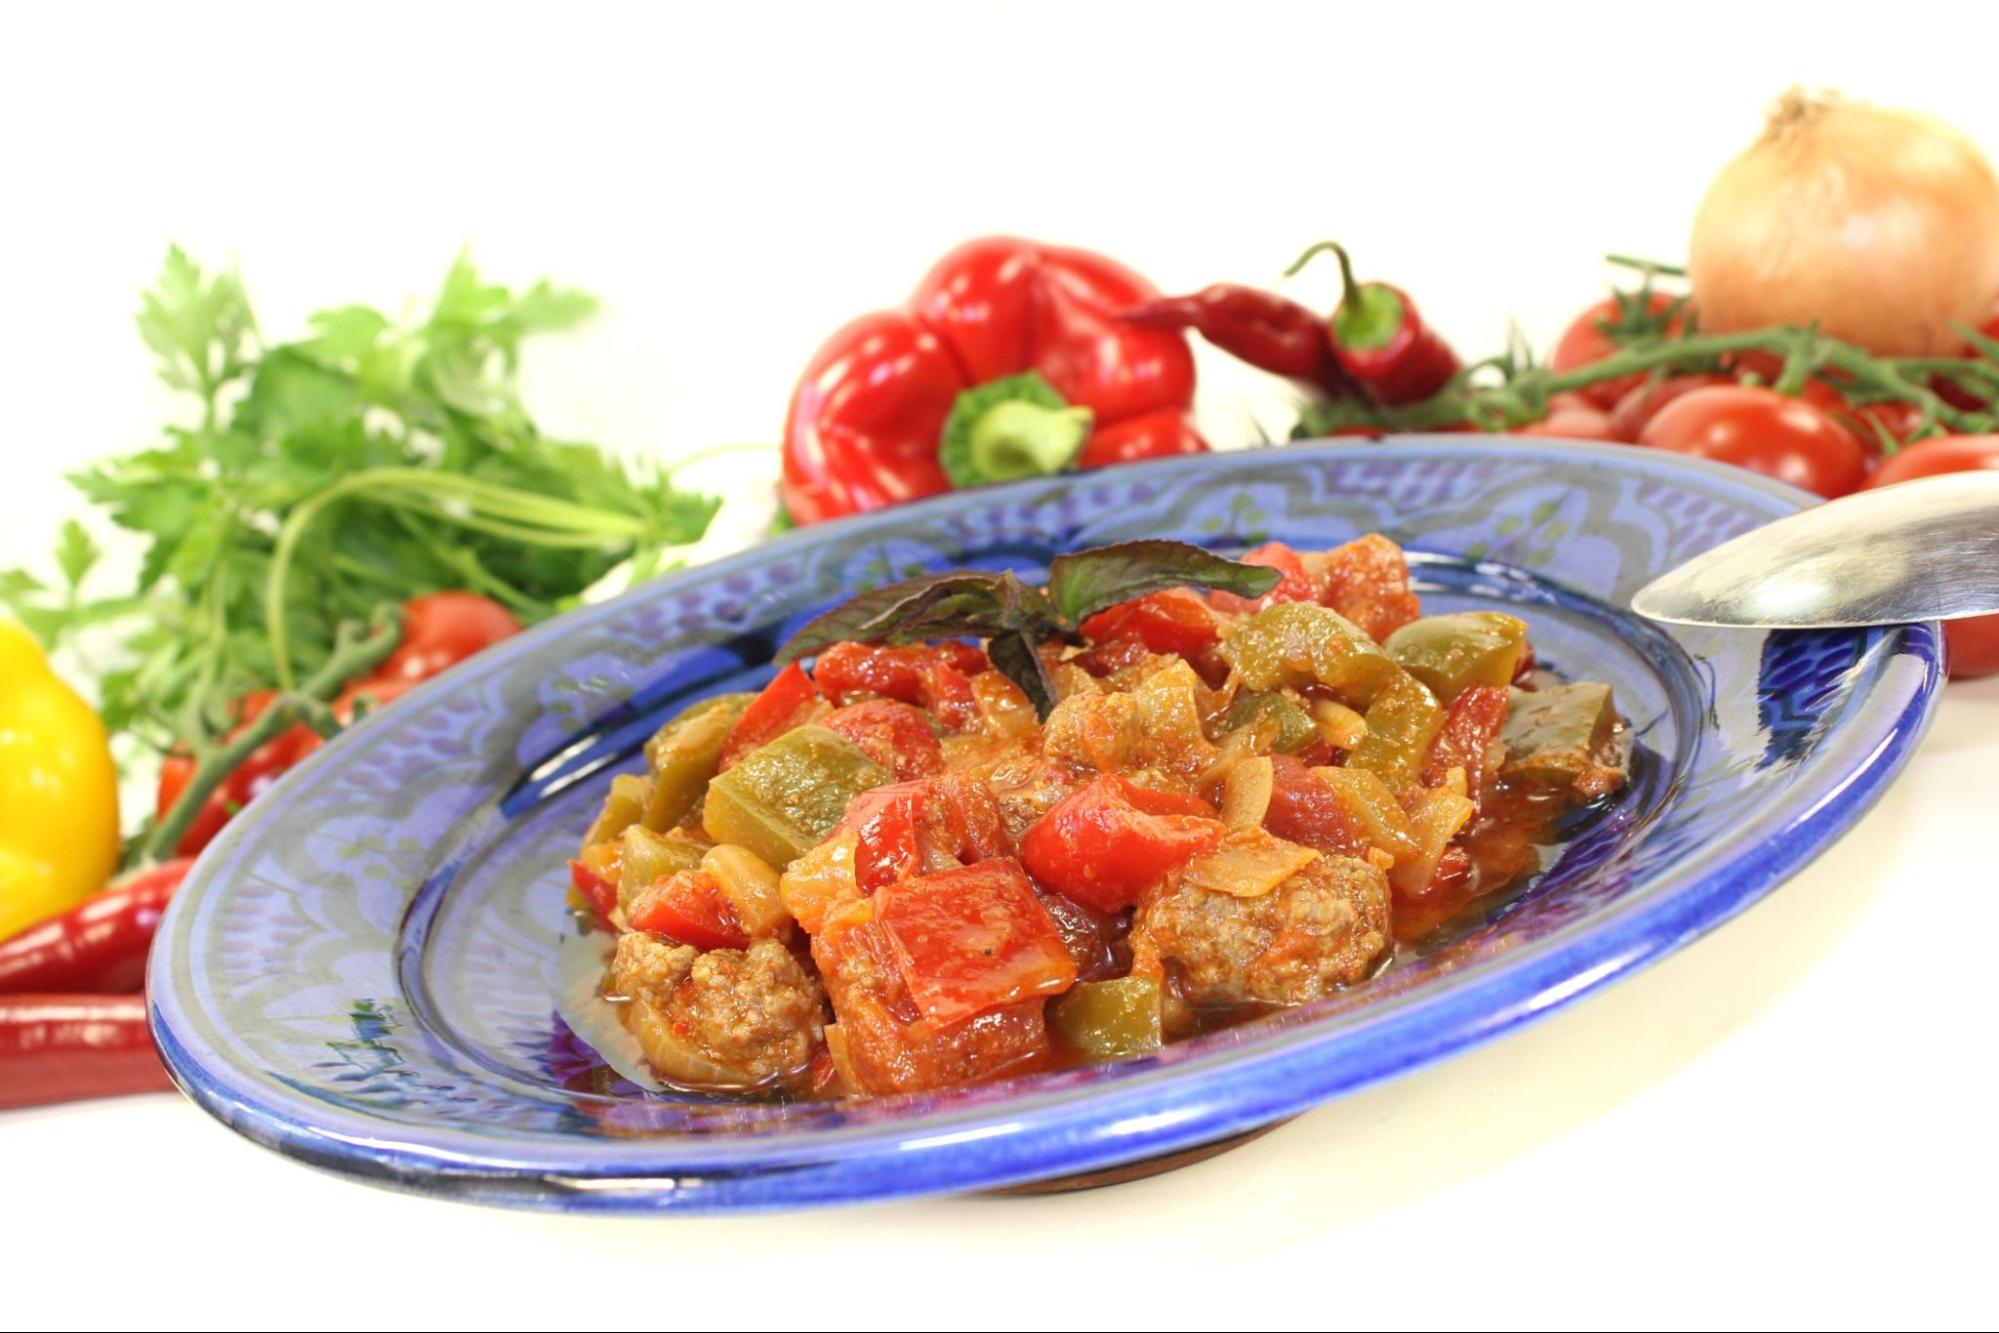 Tunisian tagine Kefta with tomatoes, peppers and ground beef